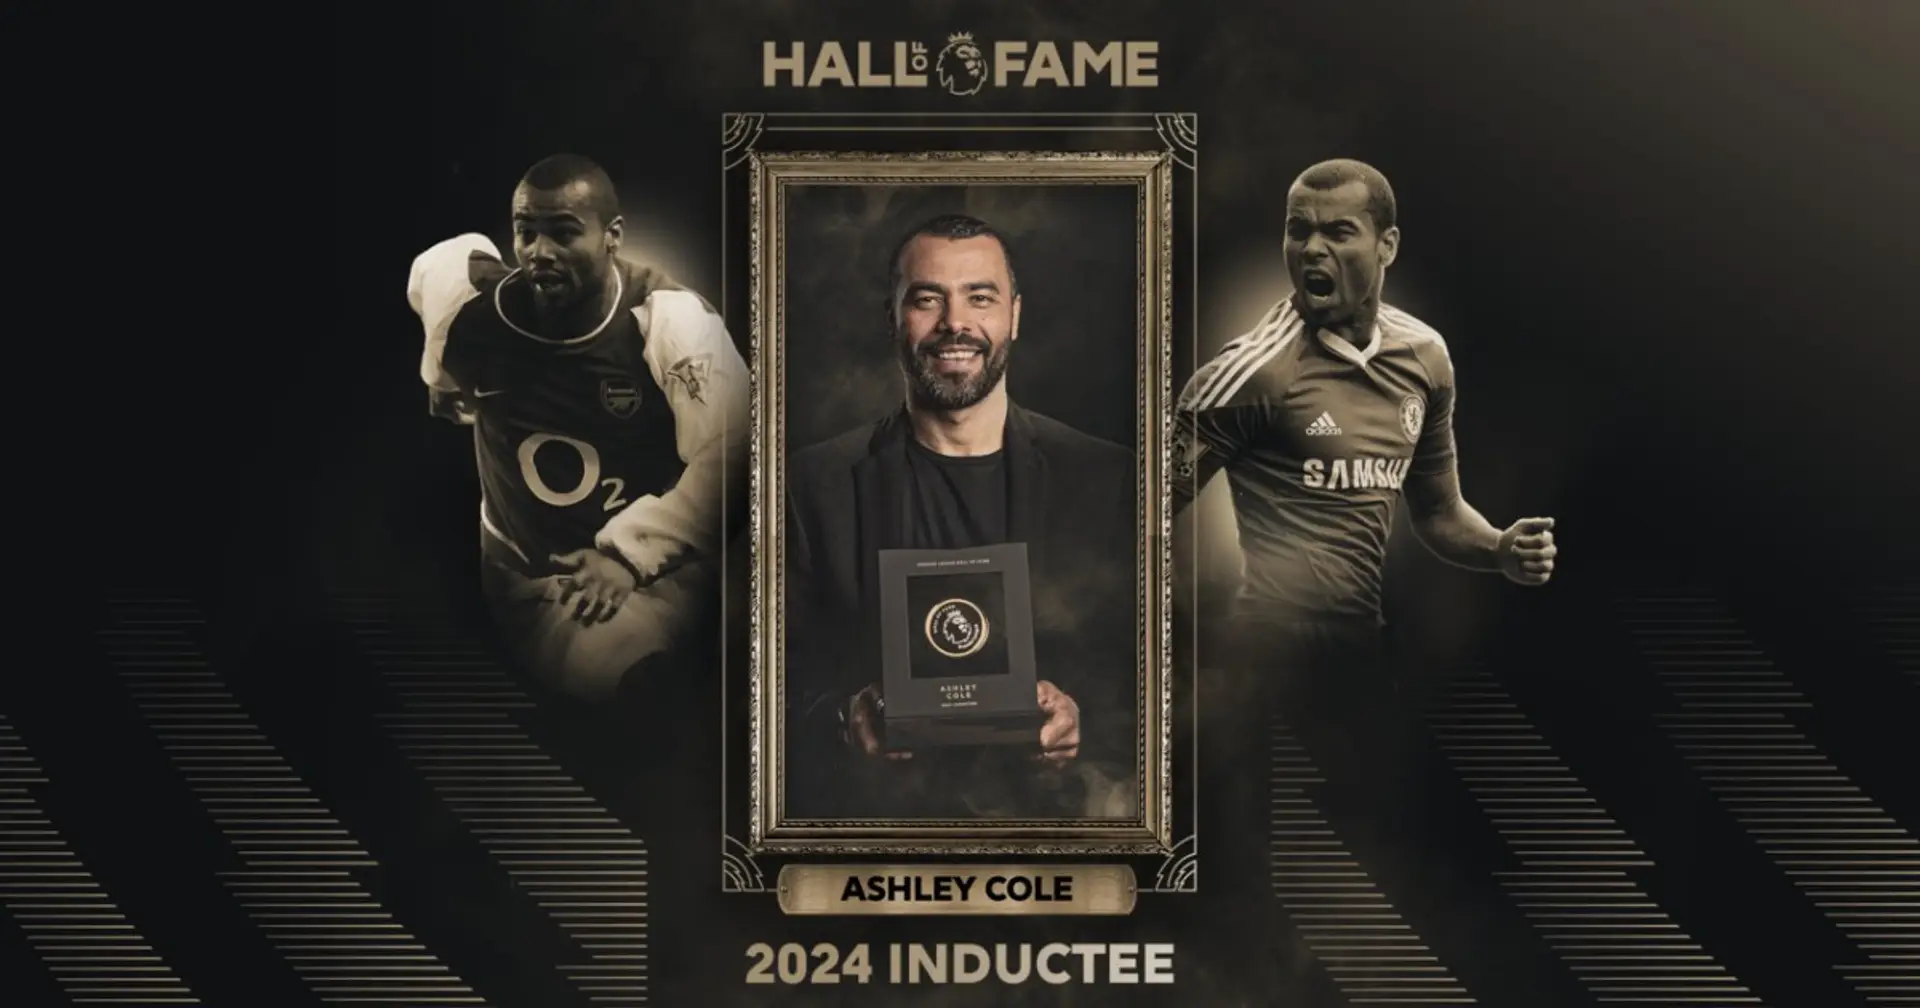 Ashley Cole inducted into Premier League Hall of Fame, Wenger names him 'greatest left-back' in competition